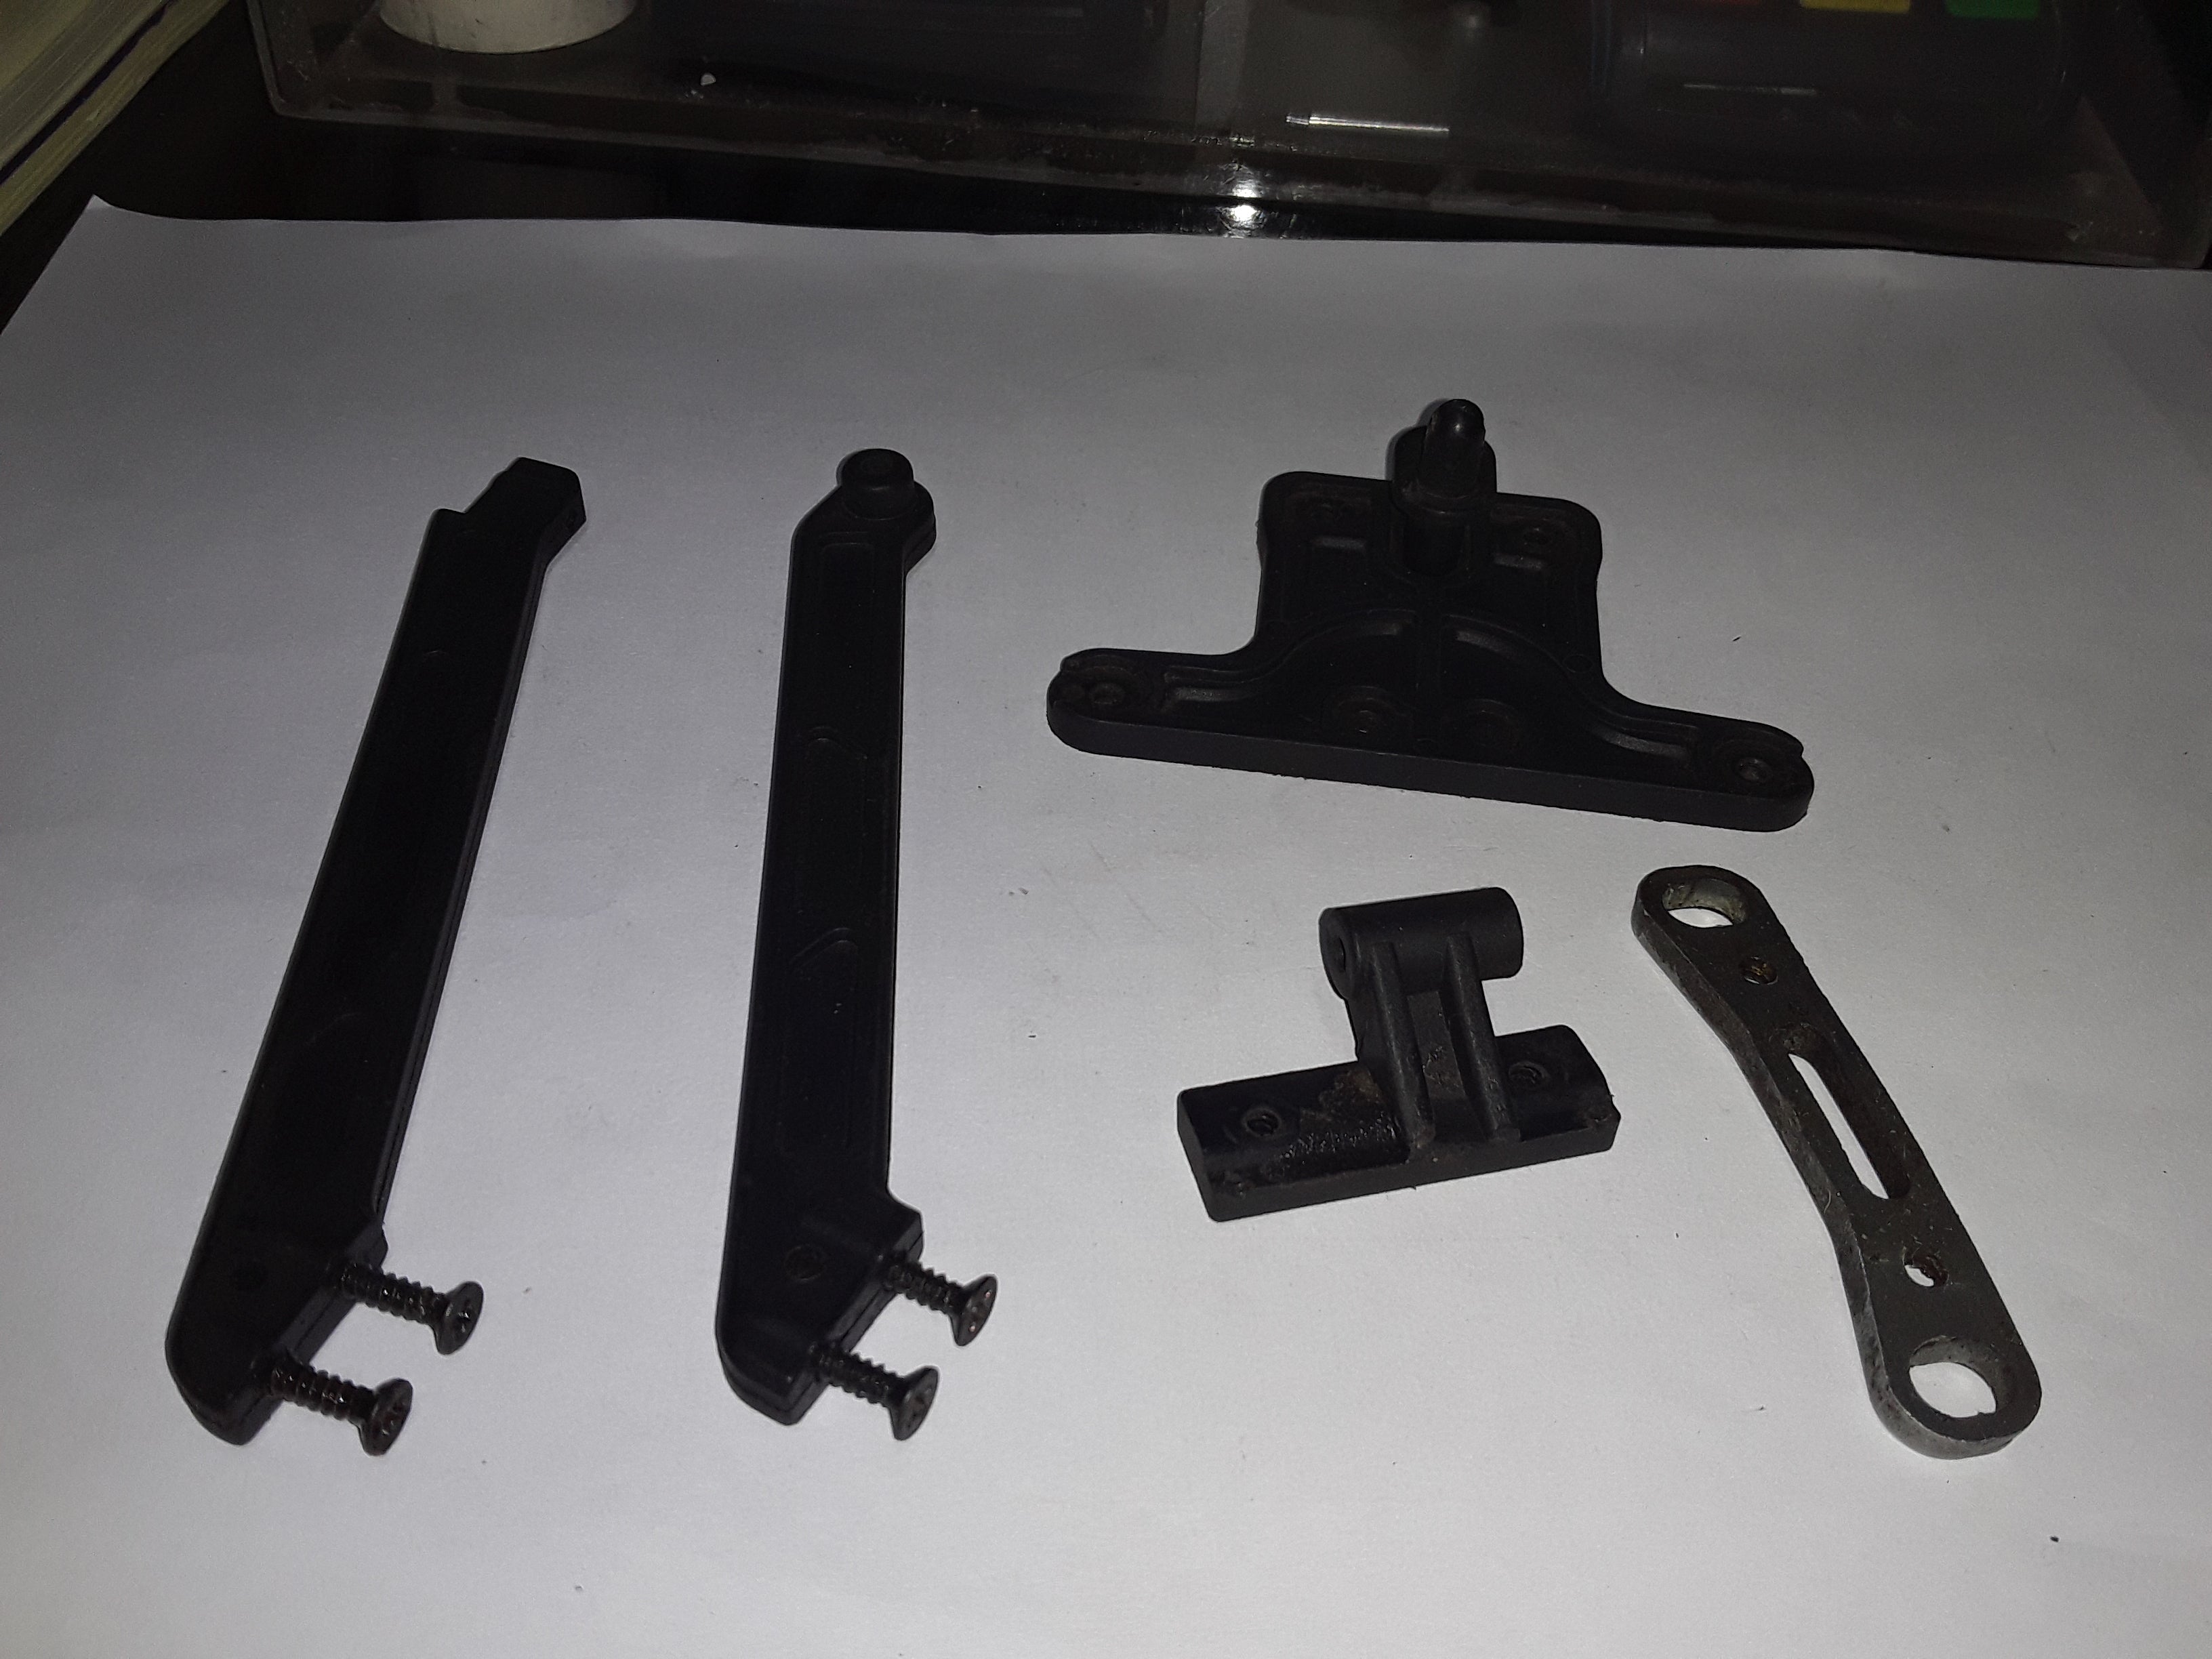 Rc Car Parts 1/8 Scale Buggy-Quality Pre Owned